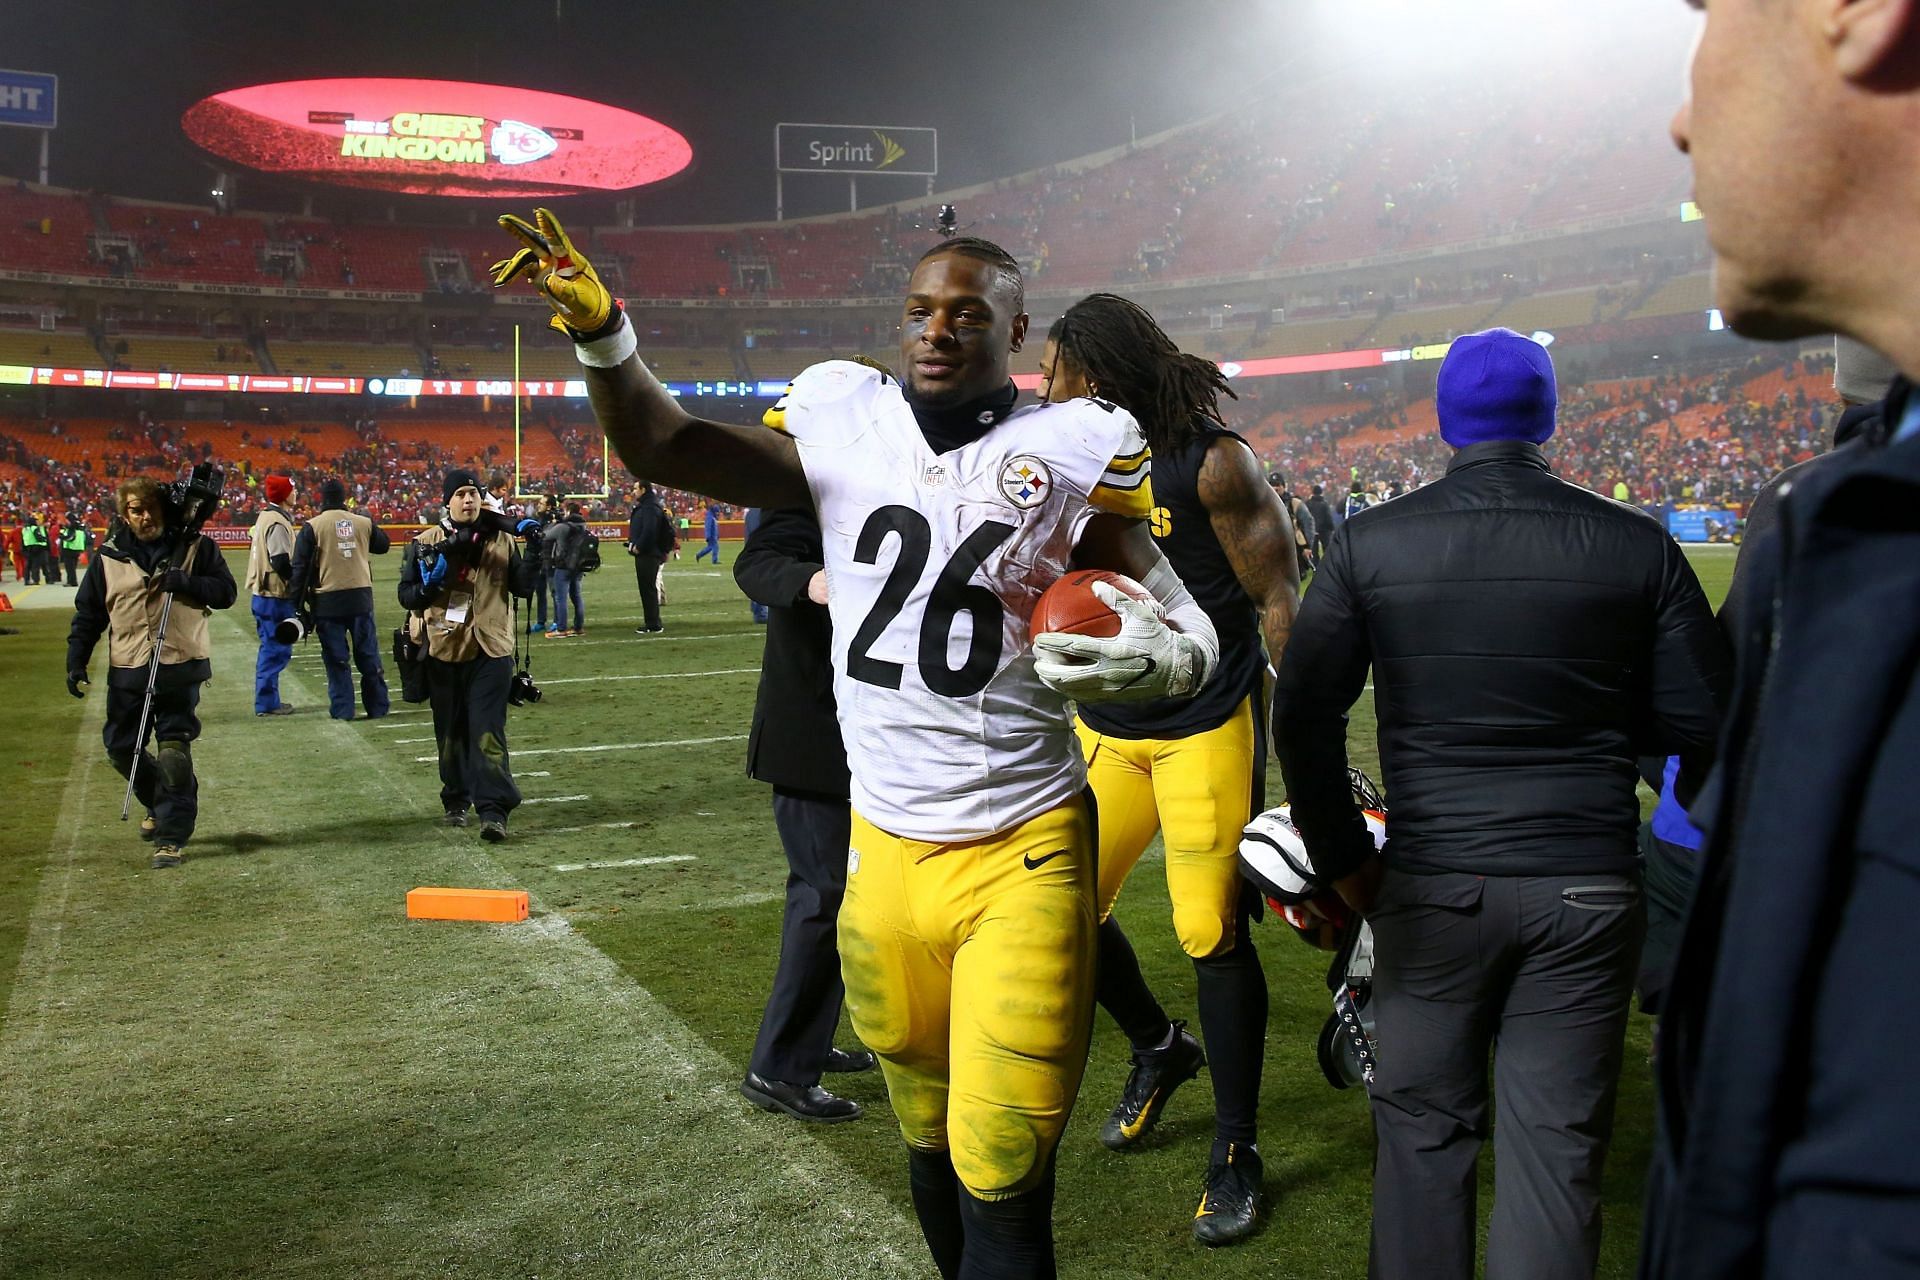 Le&#039;Veon Bell played for the Steelers during their last NFL postseason triumph, a win in Kansas City in the 2017 Divisional round (Photo: Getty)